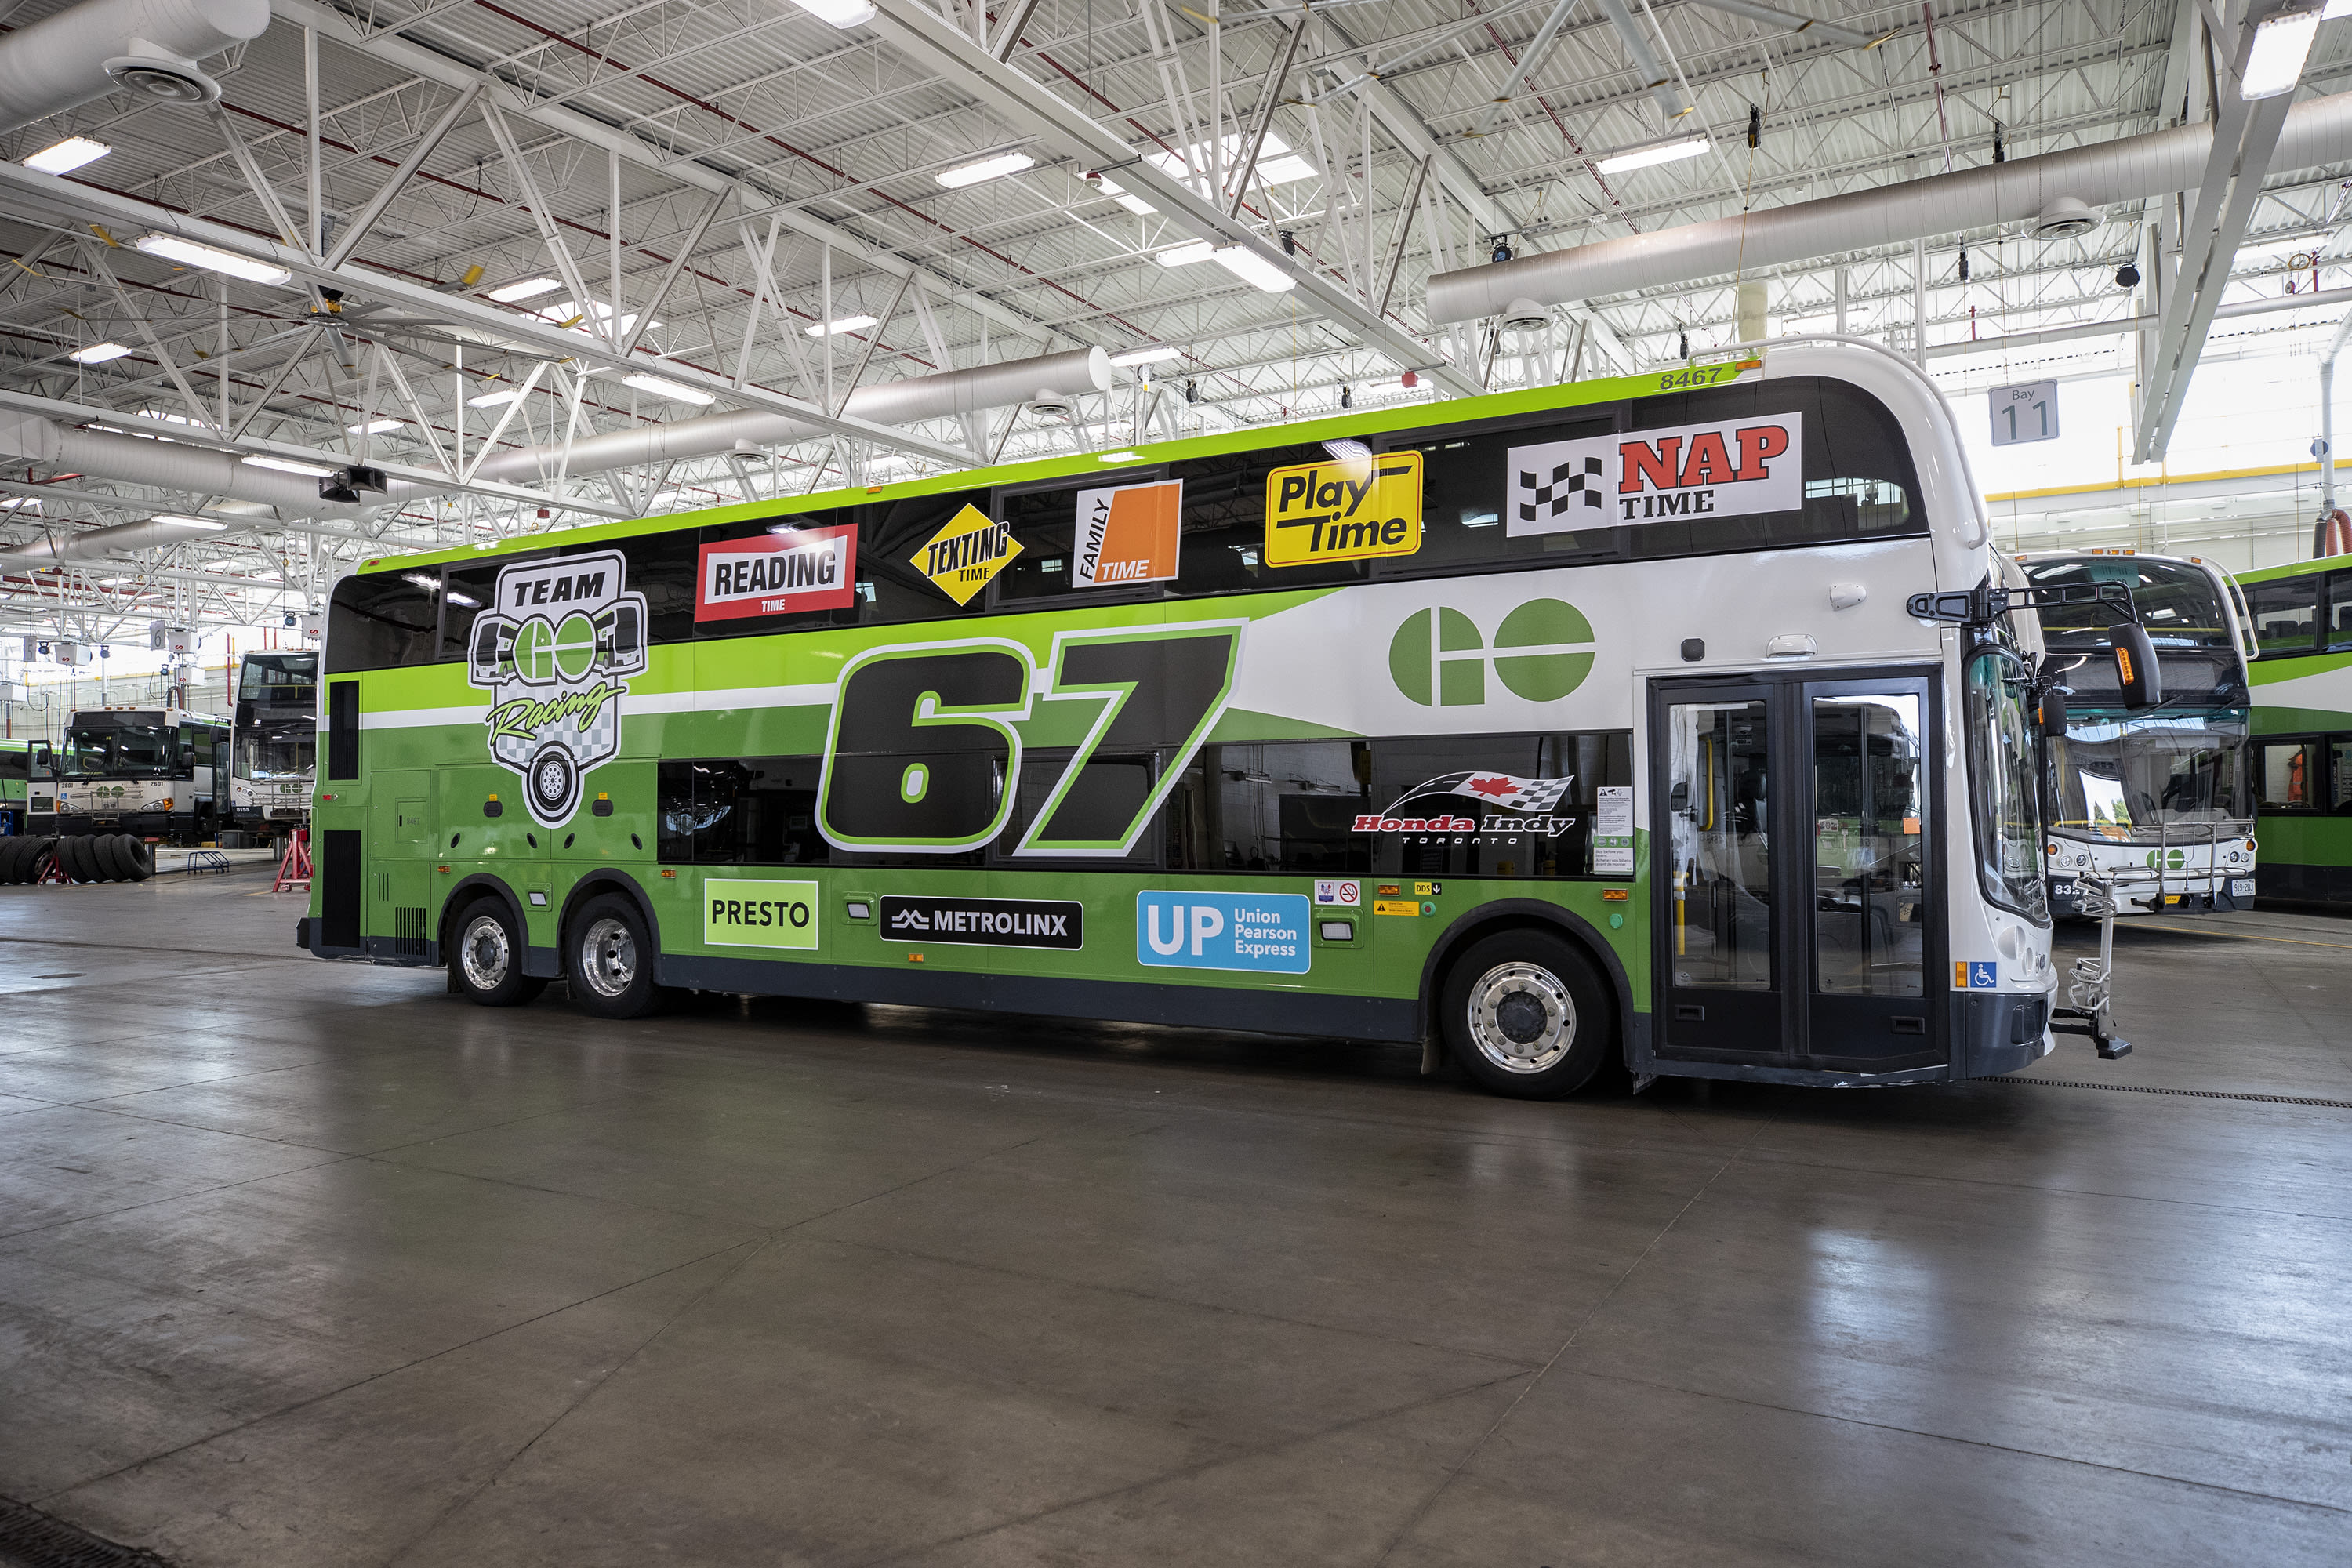 the double decker GO bus with Honda Indy decals